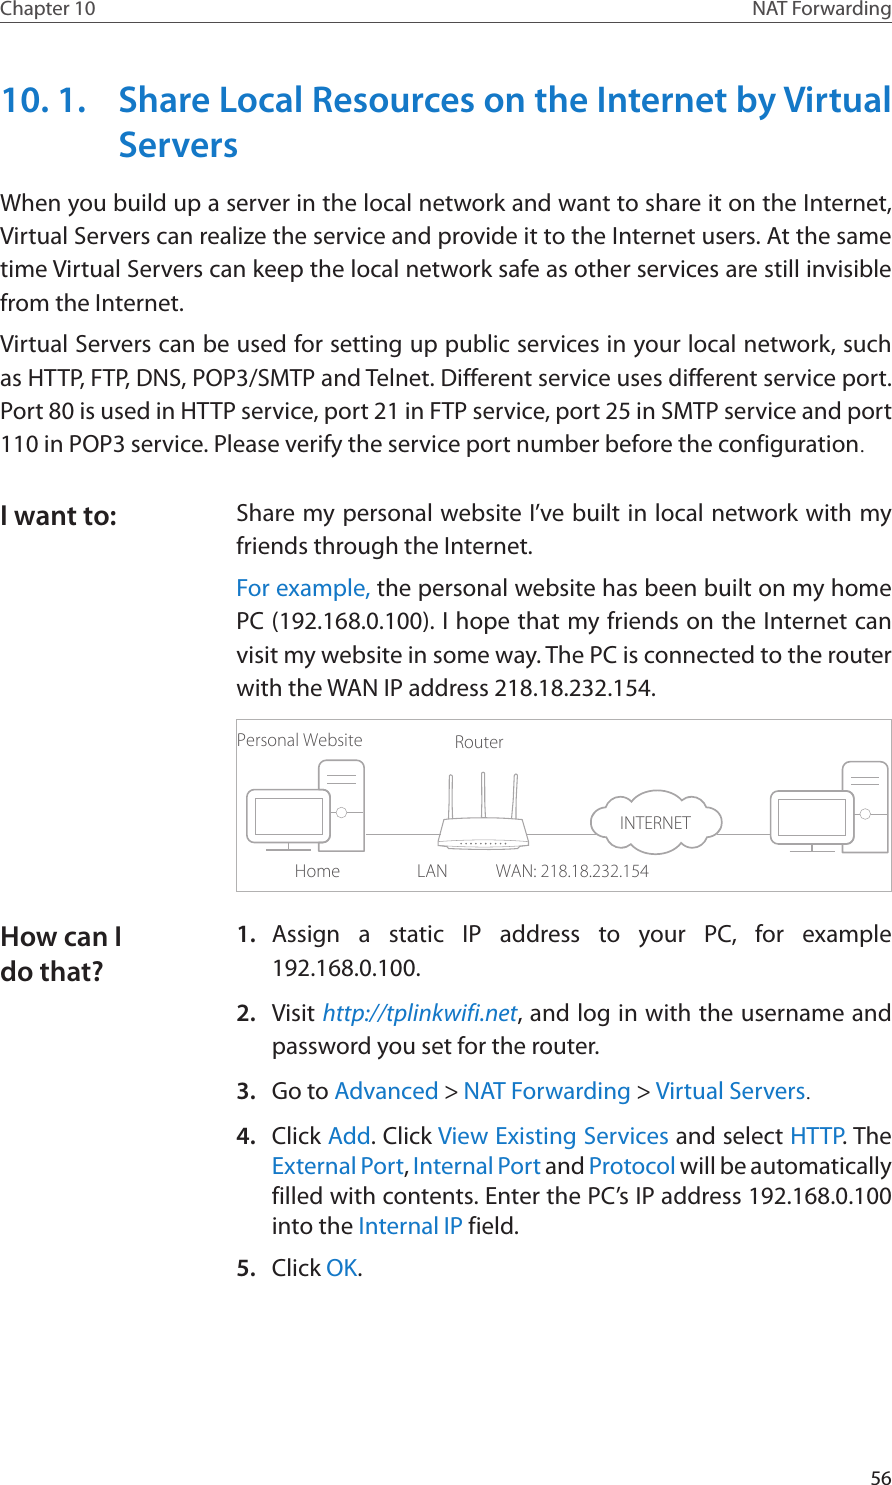 56Chapter 10 NAT Forwarding10. 1.  Share Local Resources on the Internet by Virtual ServersWhen you build up a server in the local network and want to share it on the Internet, Virtual Servers can realize the service and provide it to the Internet users. At the same time Virtual Servers can keep the local network safe as other services are still invisible from the Internet.Virtual Servers can be used for setting up public services in your local network, such as HTTP, FTP, DNS, POP3/SMTP and Telnet. Different service uses different service port. Port 80 is used in HTTP service, port 21 in FTP service, port 25 in SMTP service and port 110 in POP3 service. Please verify the service port number before the configuration.Share my personal website I’ve built in local network with my friends through the Internet.For example, the personal website has been built on my home PC (192.168.0.100). I hope that my friends on the Internet can visit my website in some way. The PC is connected to the router with the WAN IP address 218.18.232.154.Personal WebsiteHomeRouterWAN: 218.18.232.154LAN1.  Assign a static IP address to your PC, for example 192.168.0.100.2.  Visit http://tplinkwifi.net, and log in with the username and password you set for the router.3.  Go to Advanced &gt; NAT Forwarding &gt; Virtual Servers.4.  Click Add. Click View Existing Services and select HTTP. The External Port, Internal Port and Protocol will be automatically filled with contents. Enter the PC’s IP address 192.168.0.100 into the Internal IP field.5.  Click OK.I want to:How can I do that?INTERNET